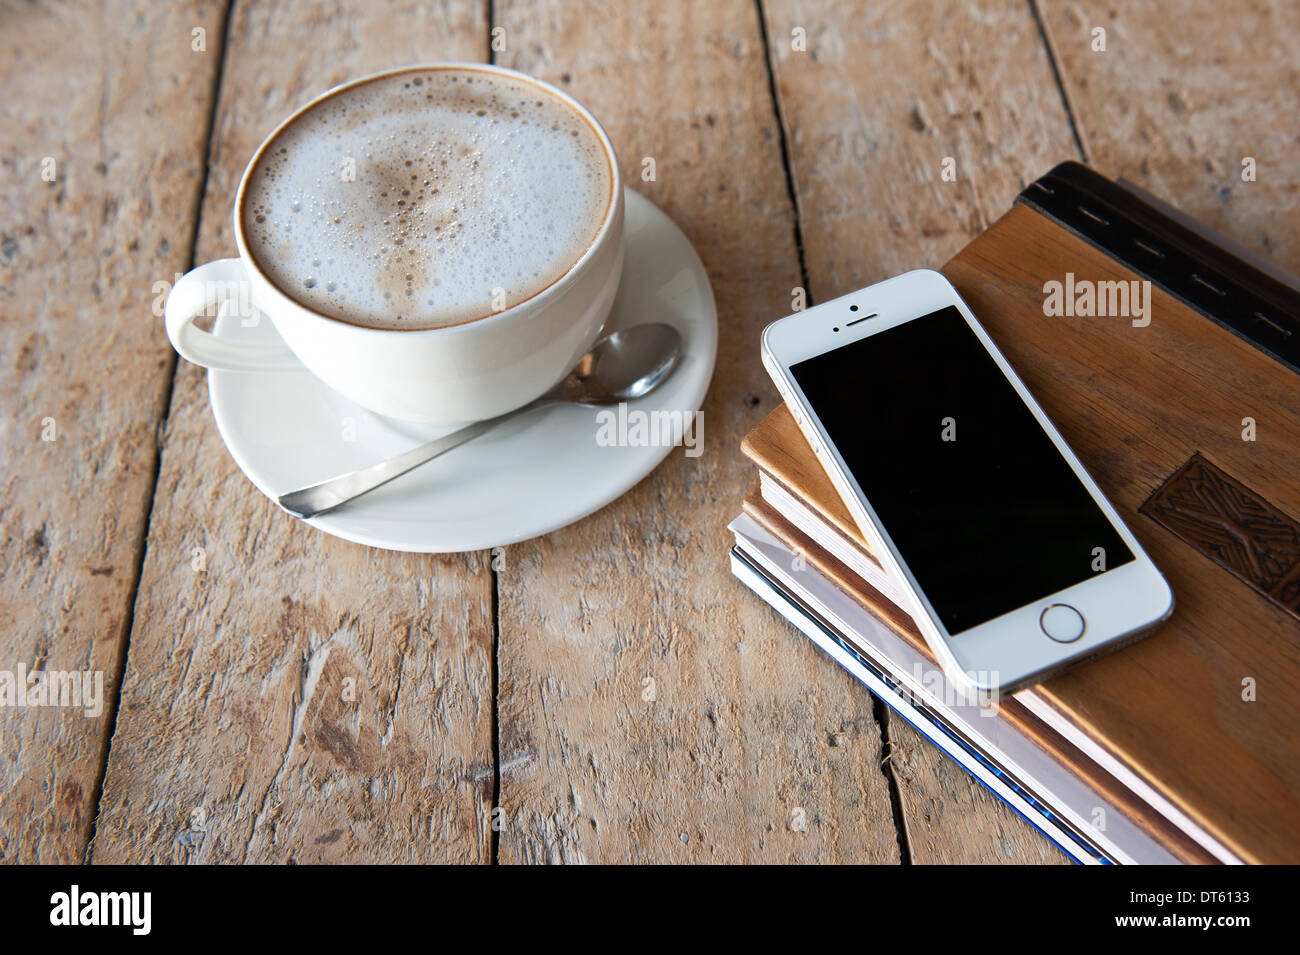 Iphone 5s on stack of books next to a cup of foamy coffee. Stock Photo